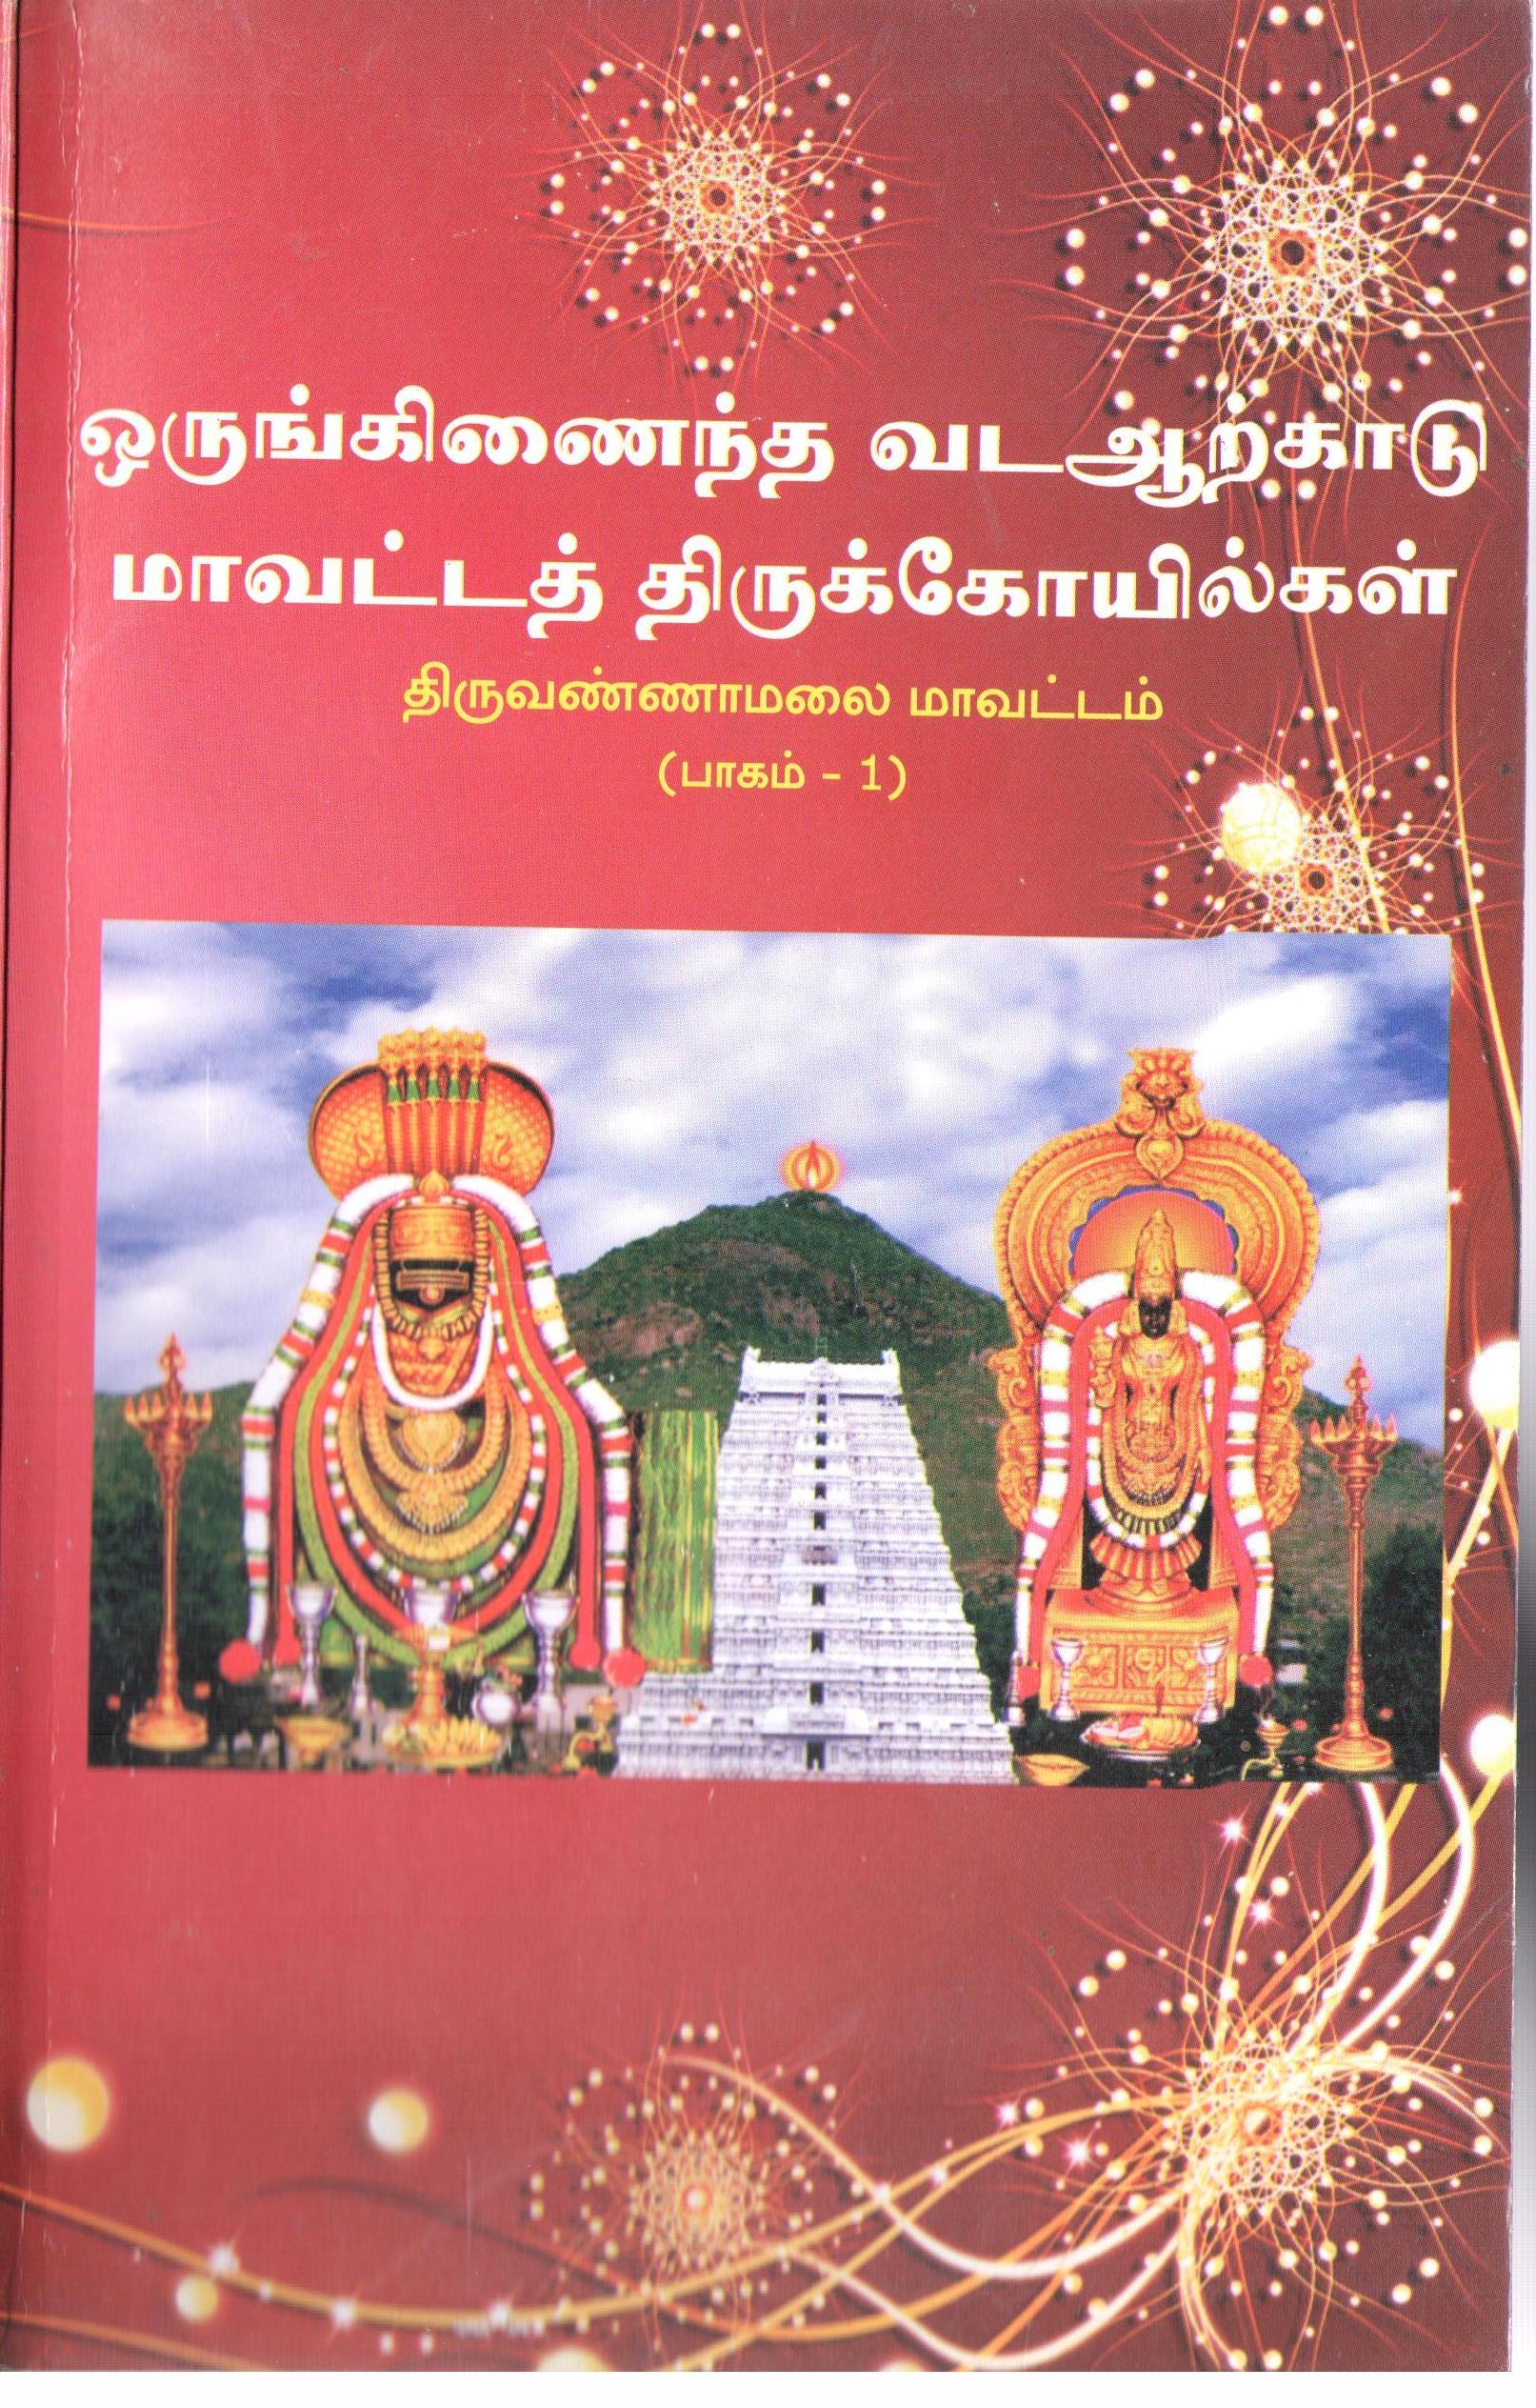 Temples in the Erstwhile North Arcot District - Temples - Tiruvannamalai Circle - Part-1